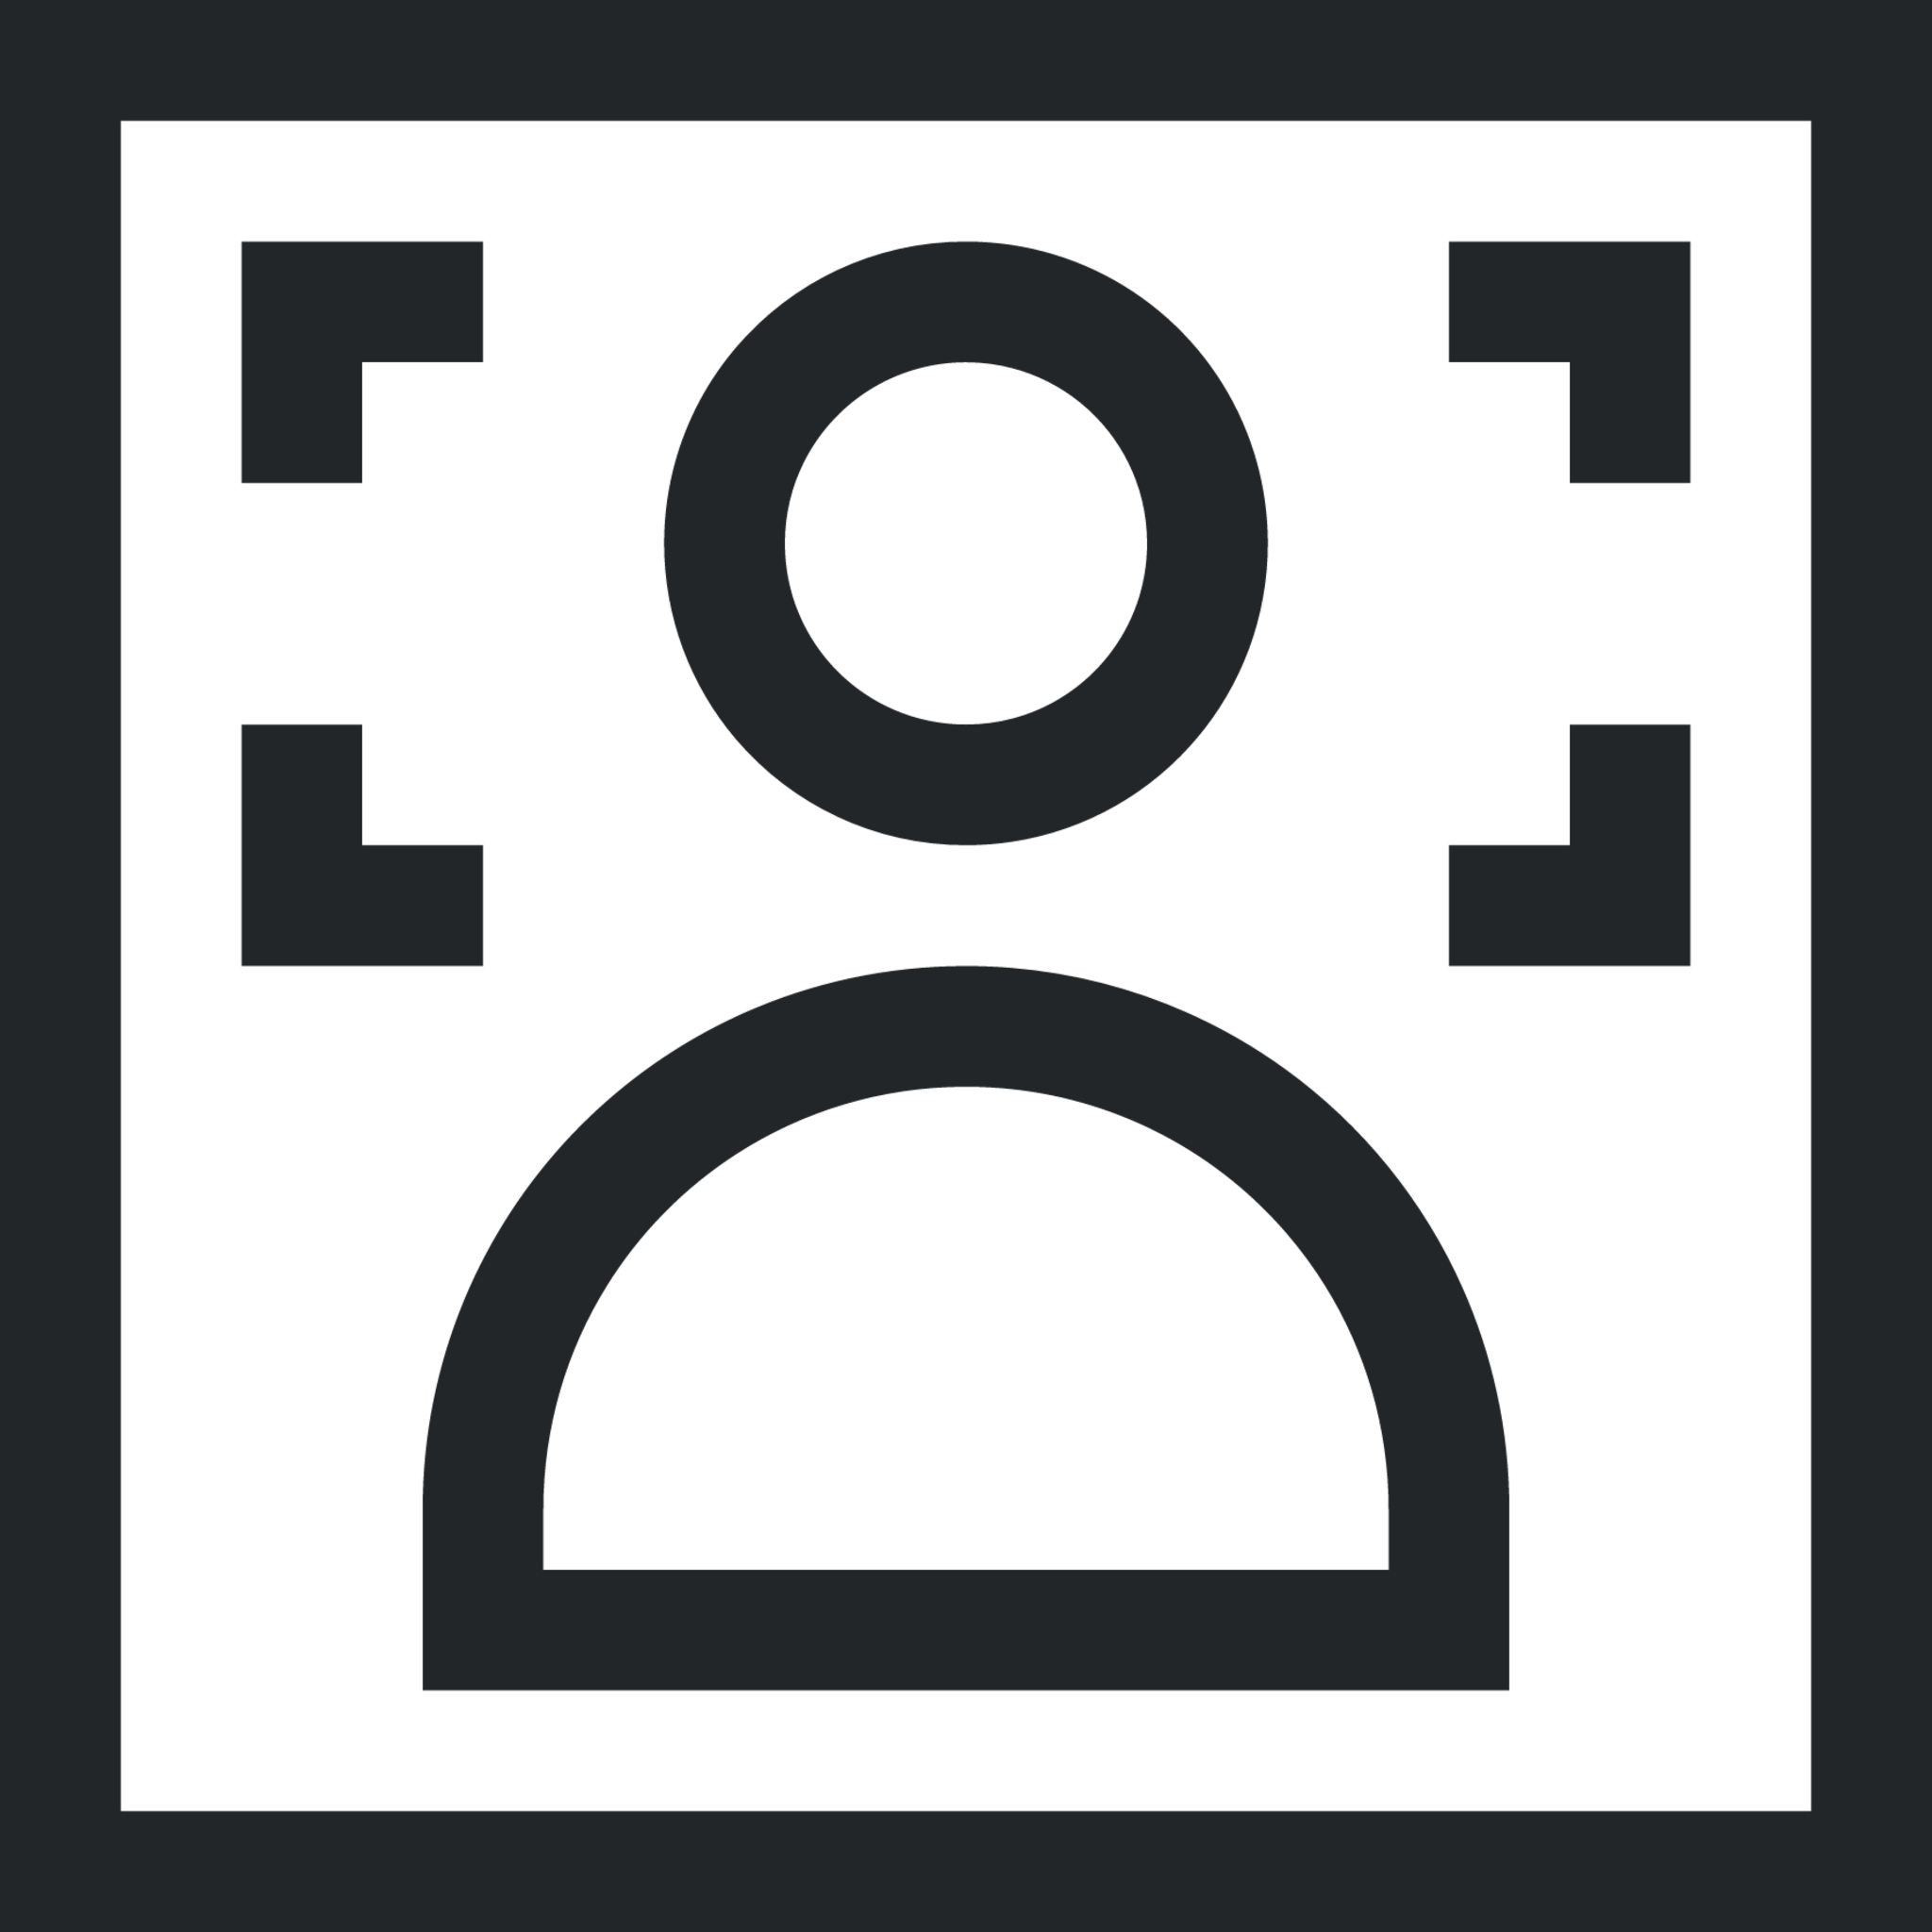 edit image face show icon